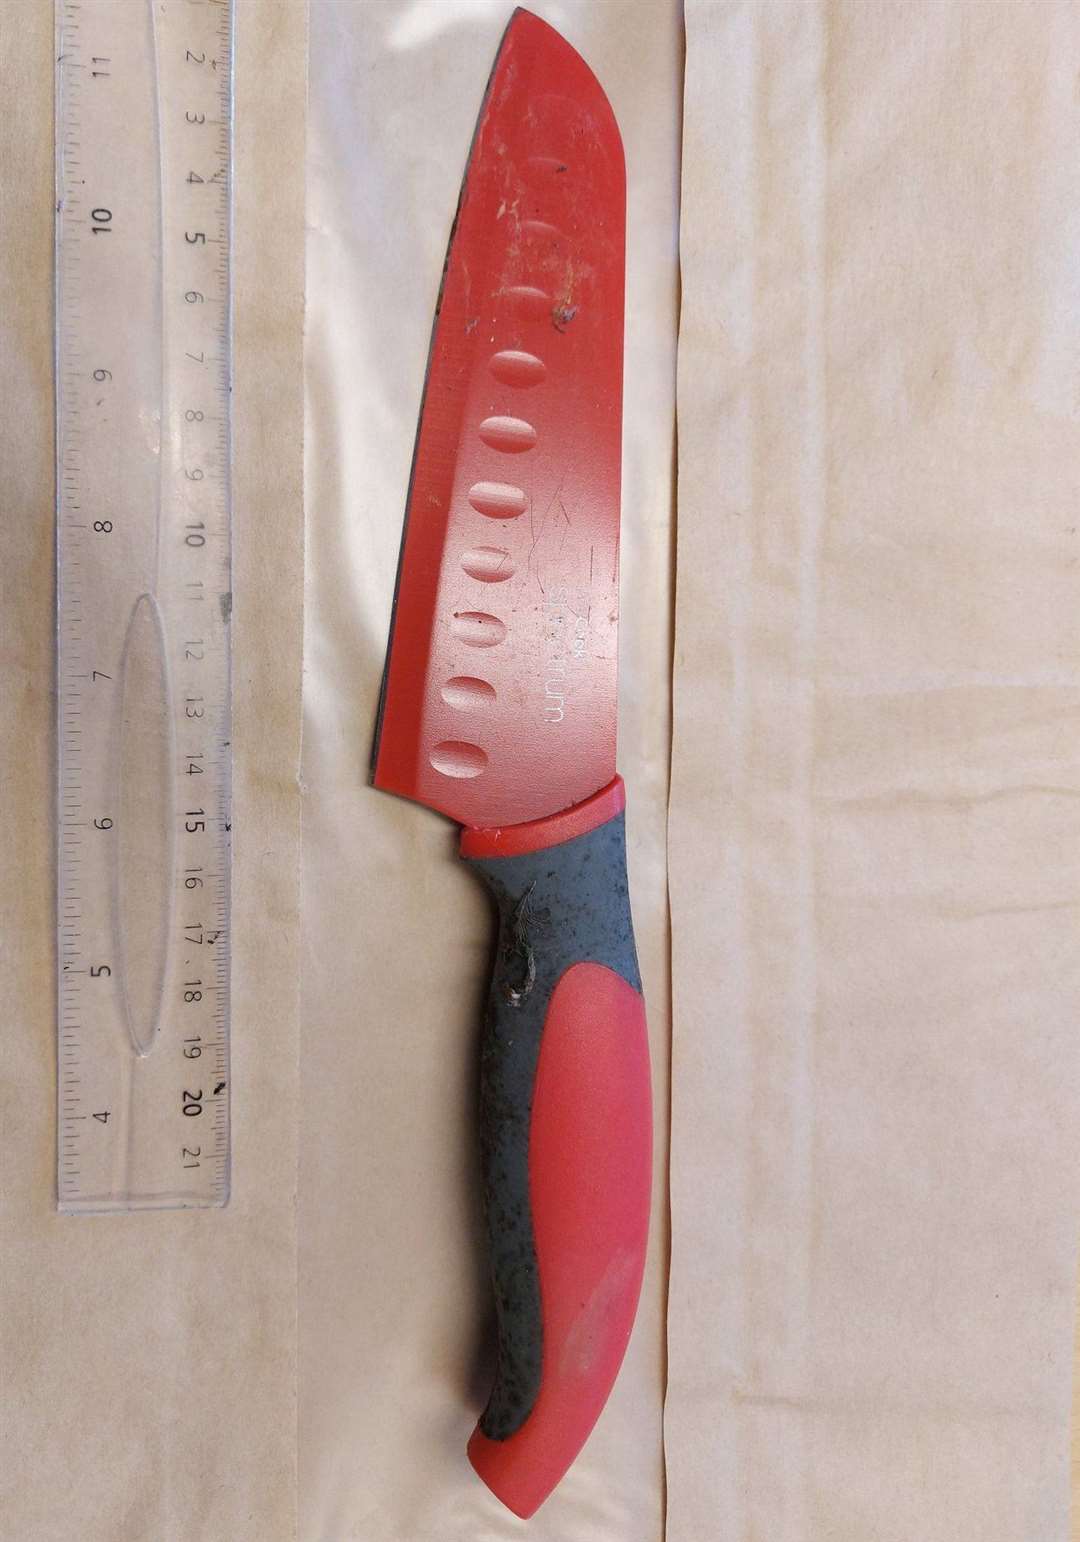 The knife that was found at the basketball courts. Photo: Kent Police